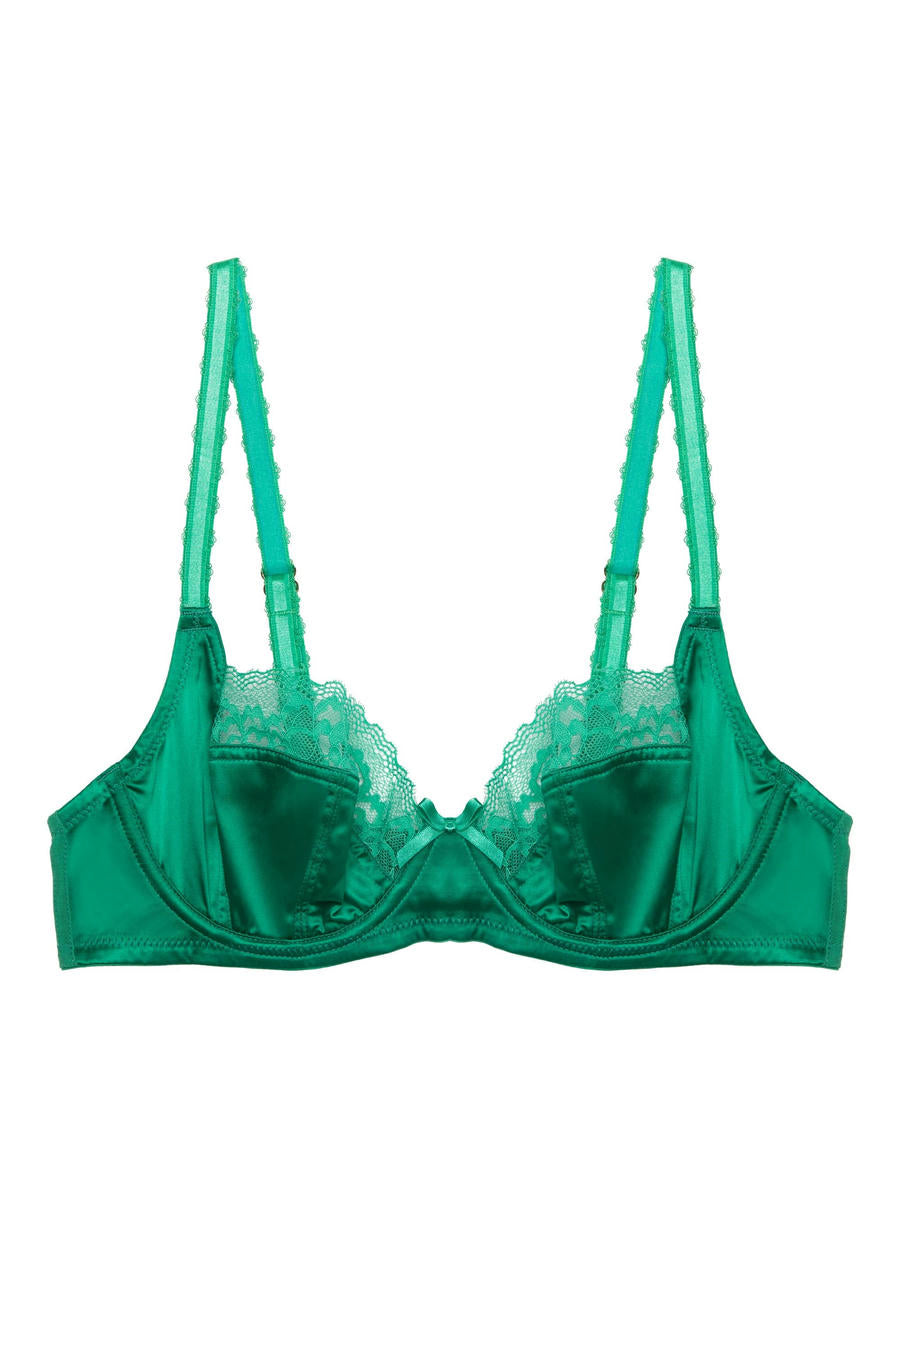 💚💚 GEORGE Gorgeous Green Bra Size 36D NEW From Entice Collection 💚💚